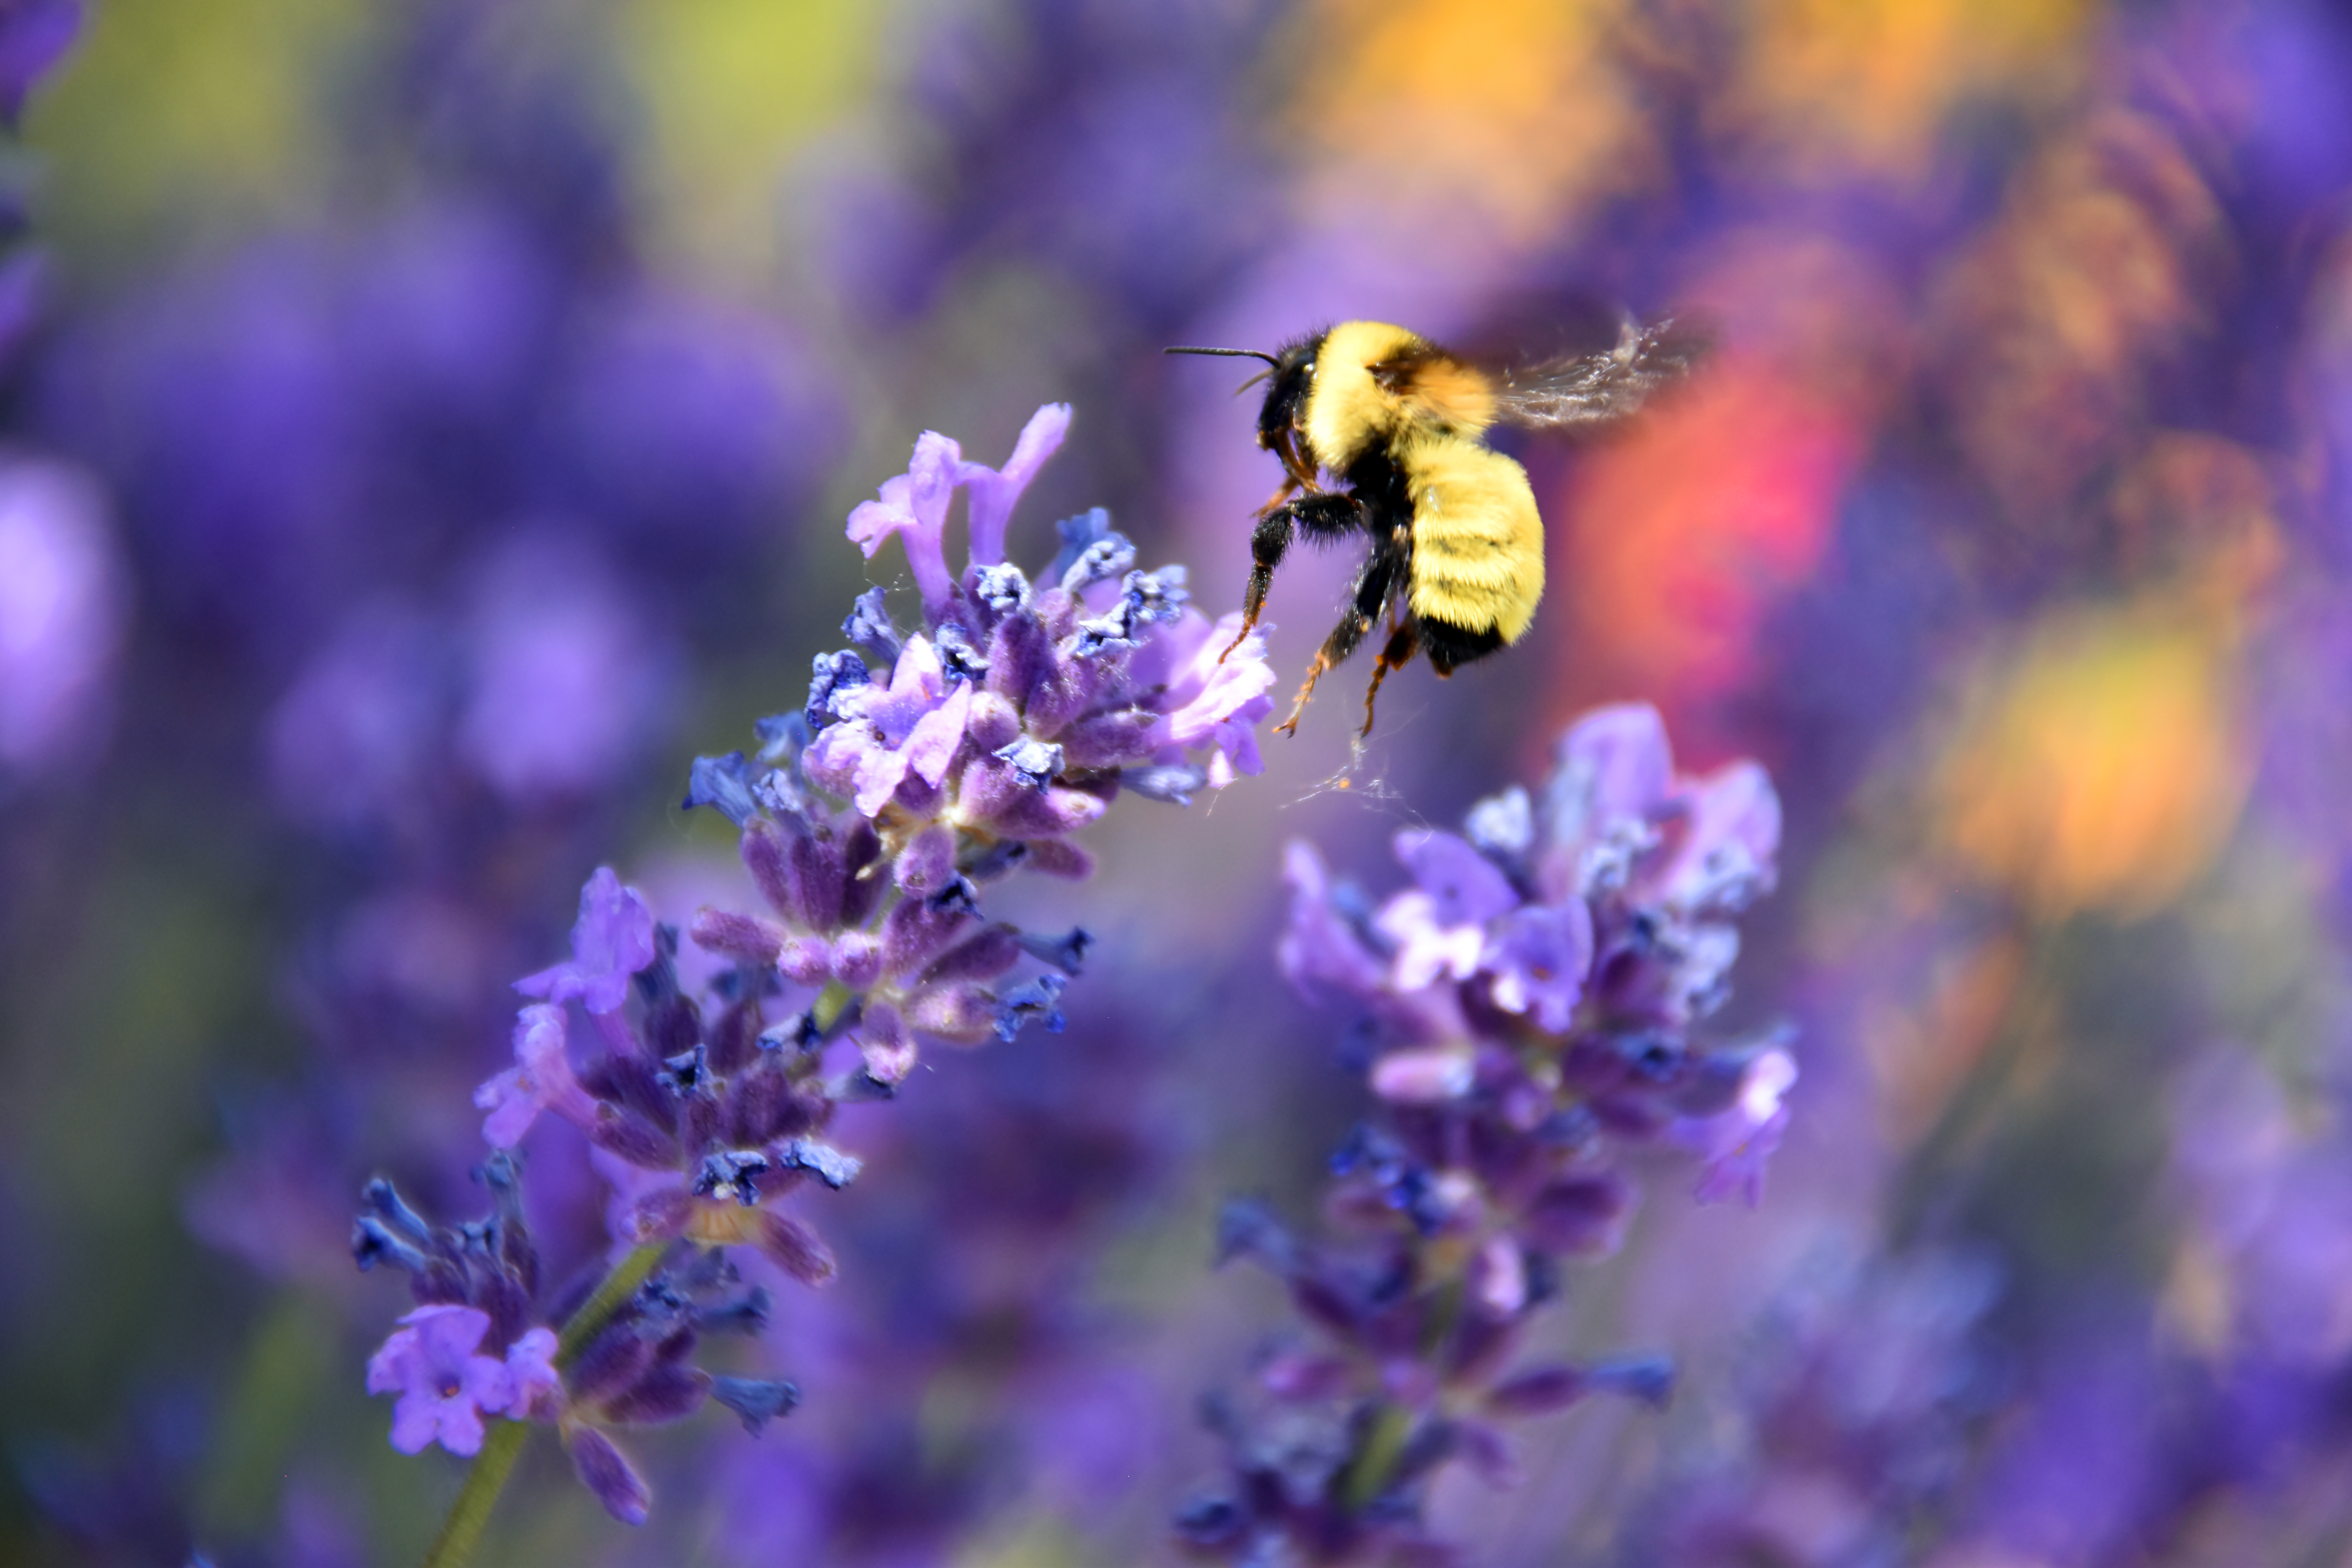 A fuzzy, primarily yellow, bee flies towards a purple sprig of flowers. The bee and the flowers are in sharp focus. The background, made up of purples and reds, is blurred.